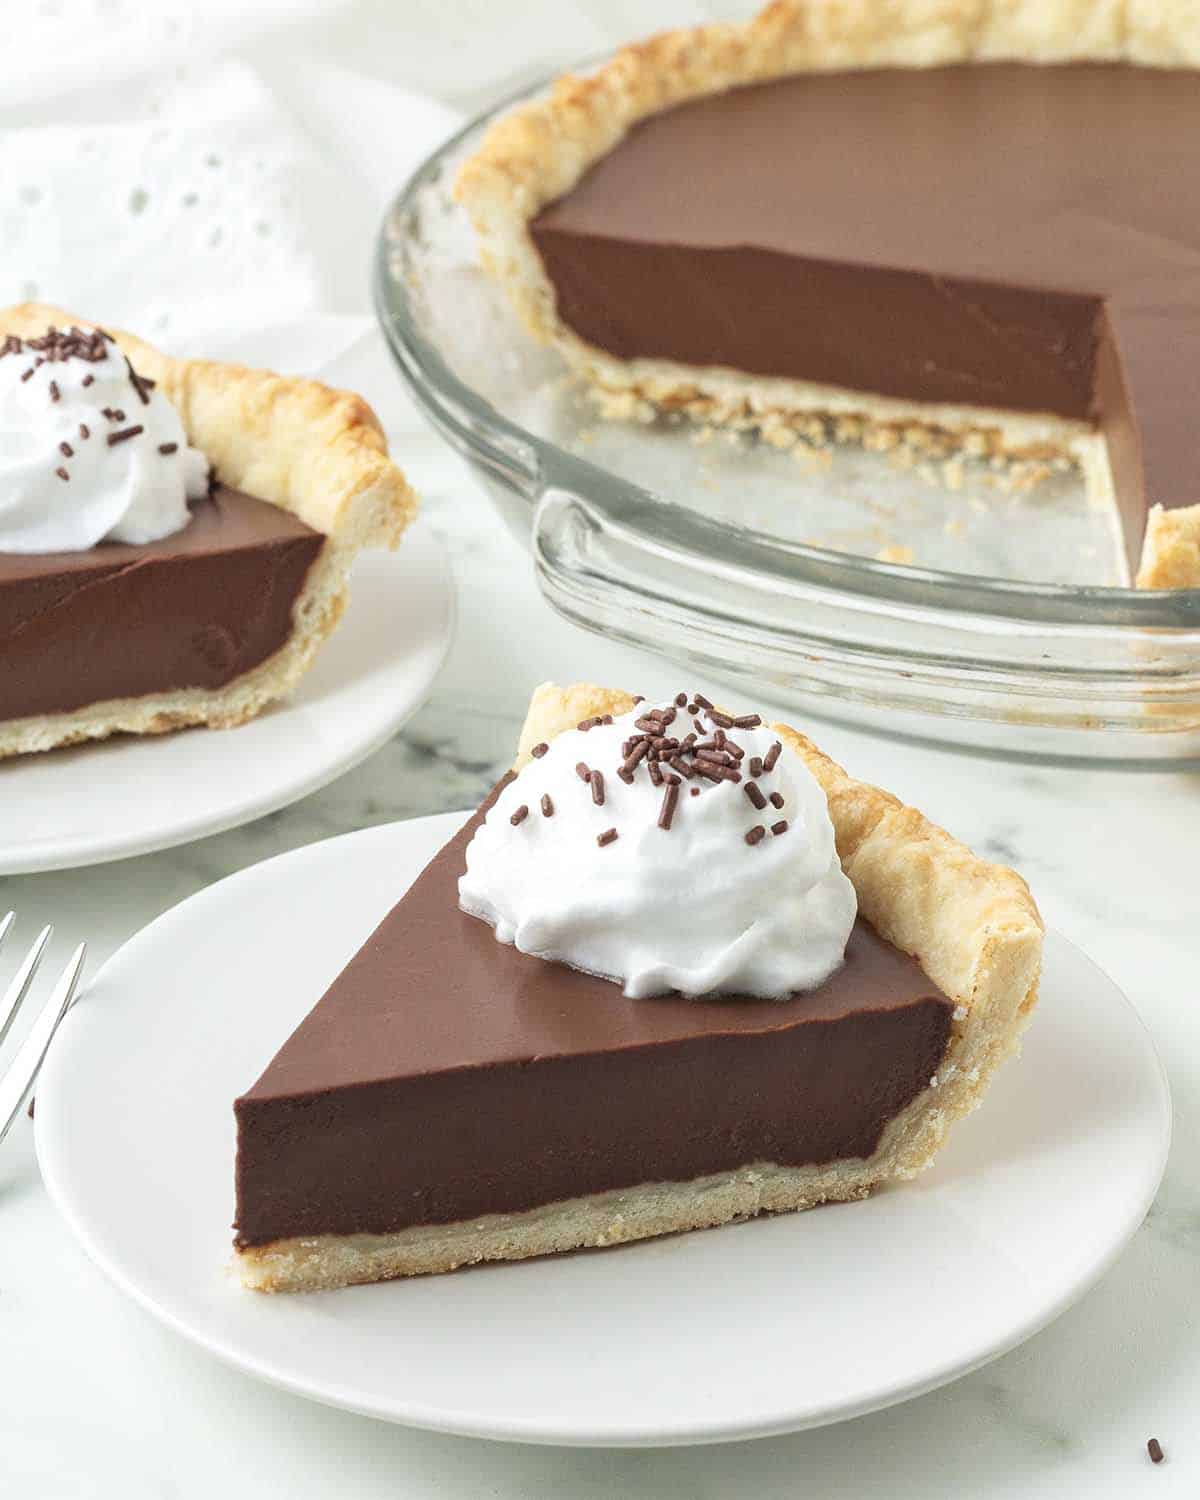 A slice of non-dairy chocolate pie on a white plate, and more pie sits in the background.